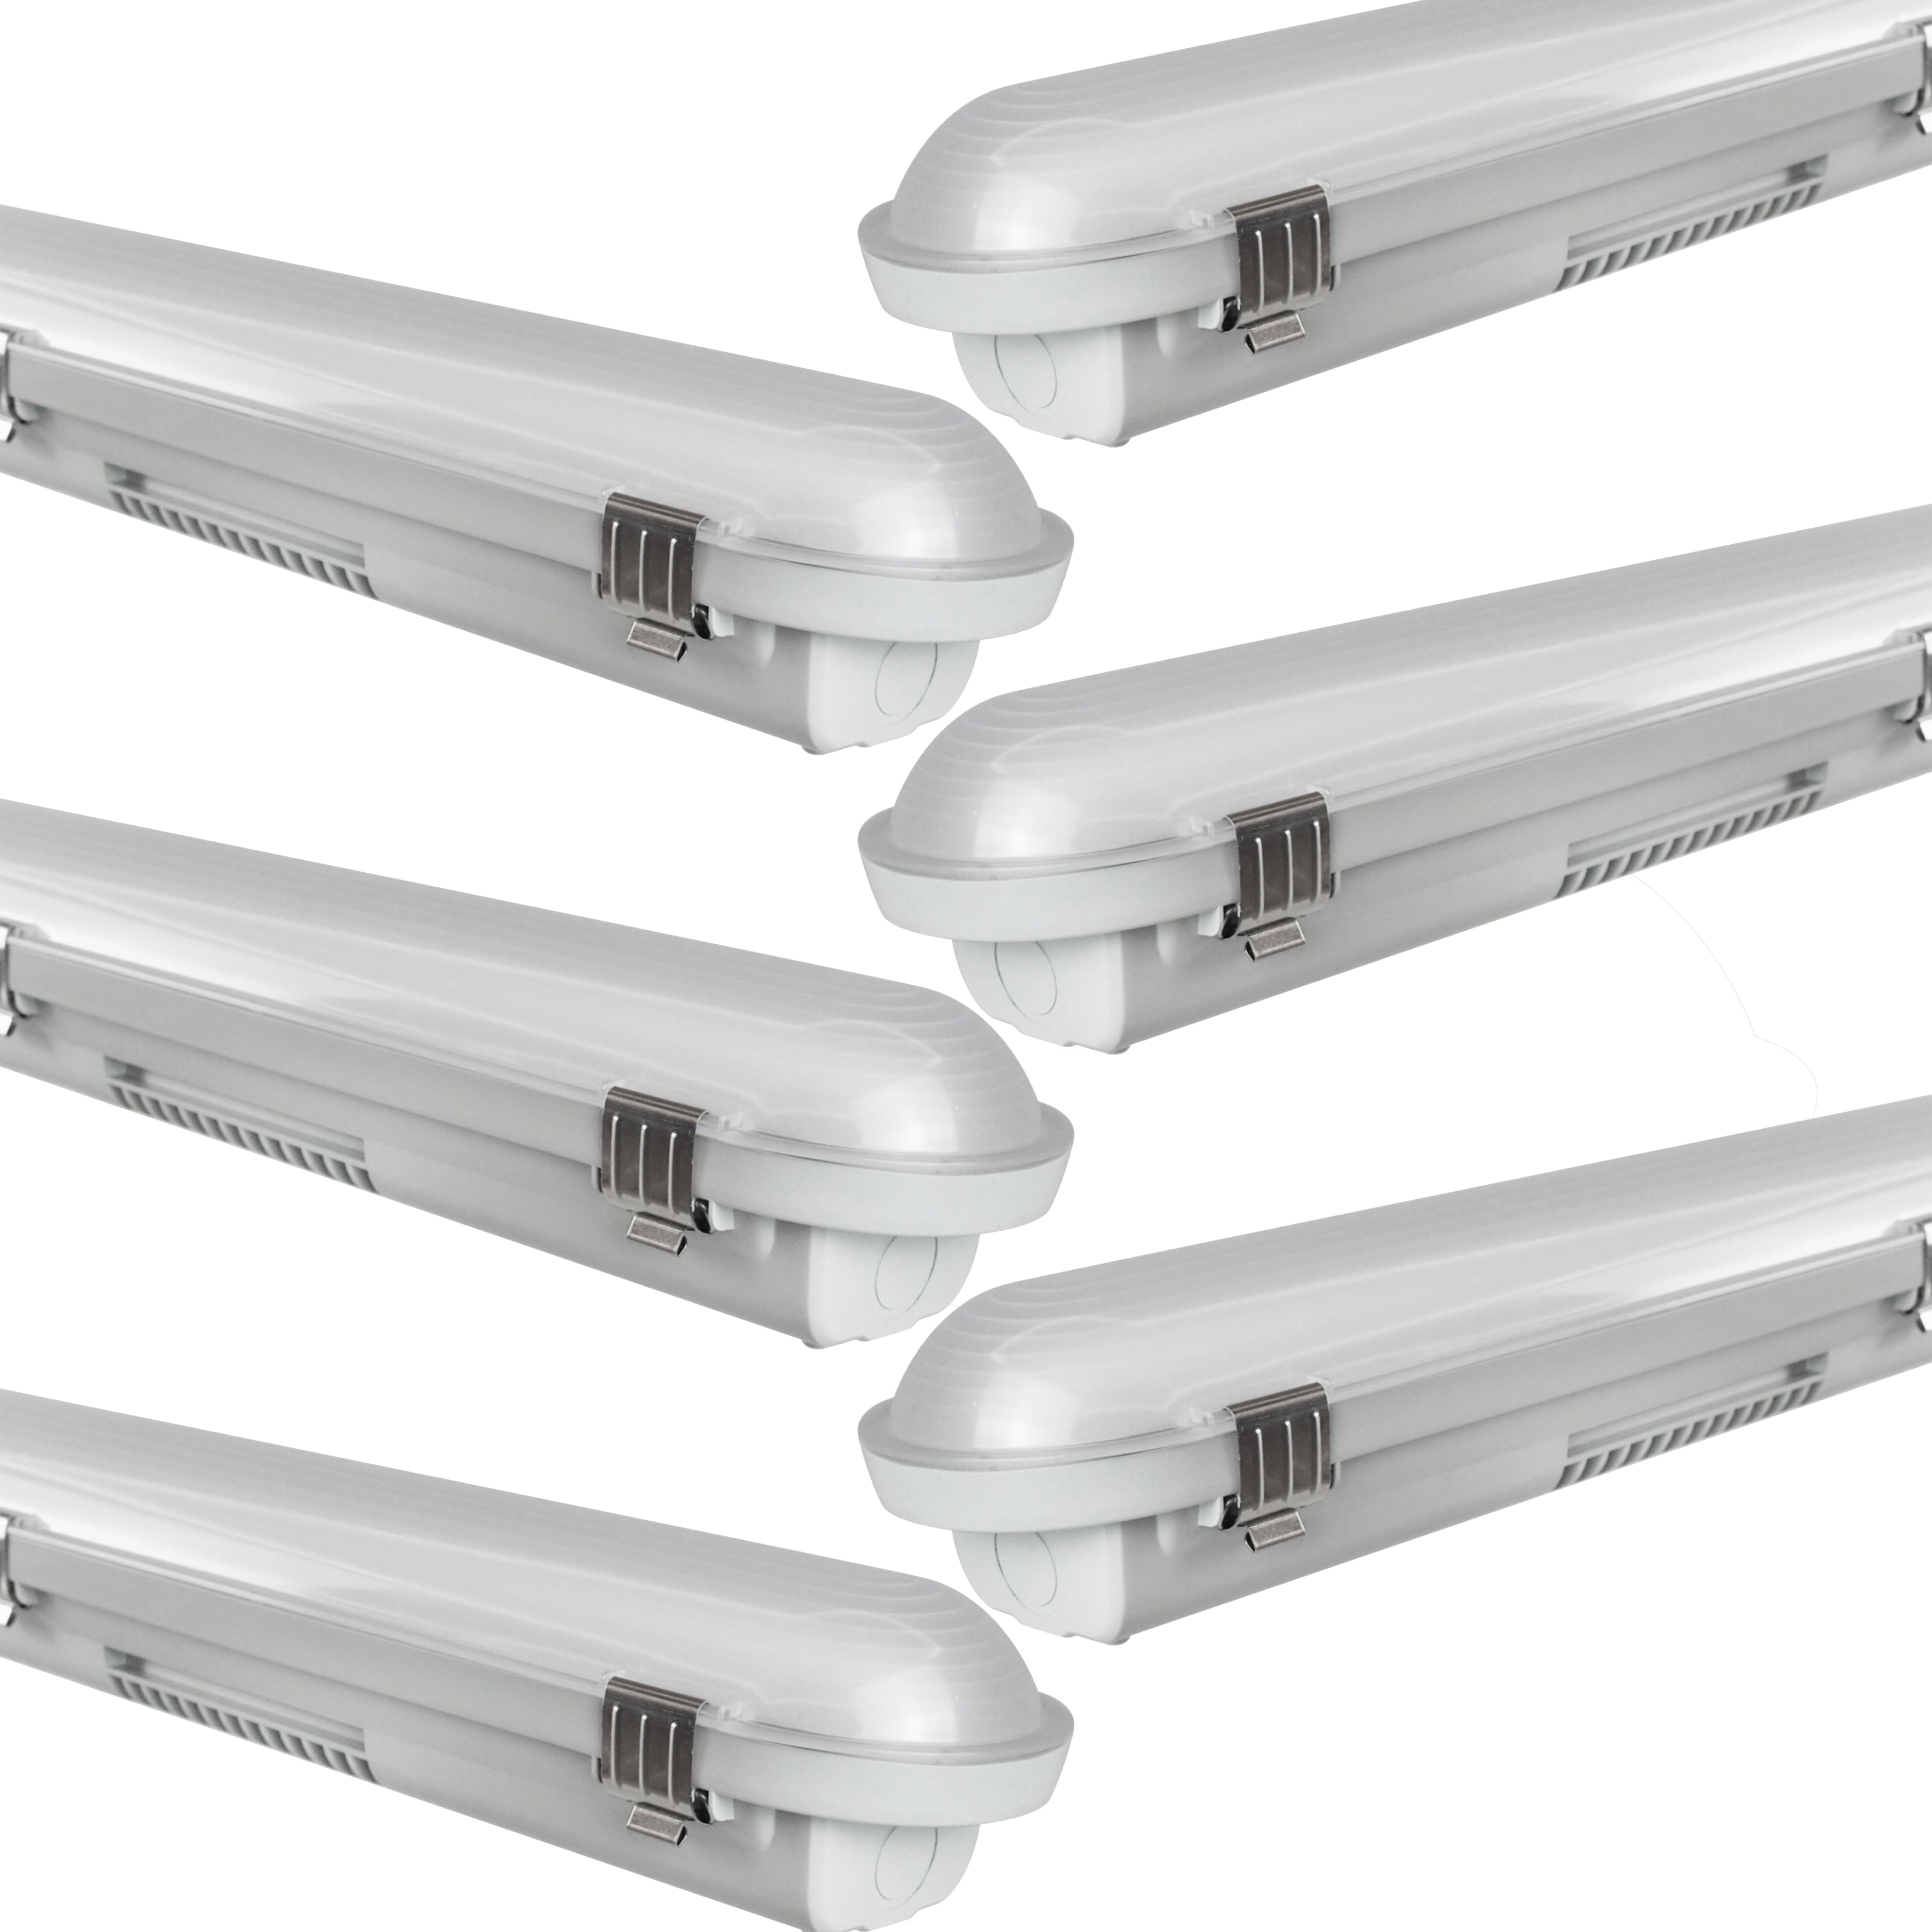 LED Non Corrosive IP65 Batten Fitting Light 120cms 40W 6000K, 4800 Lumens Ultra Bright, Up to 20000 Hours of Operation, Instant Start, Ideal for Parking Lots, Garages